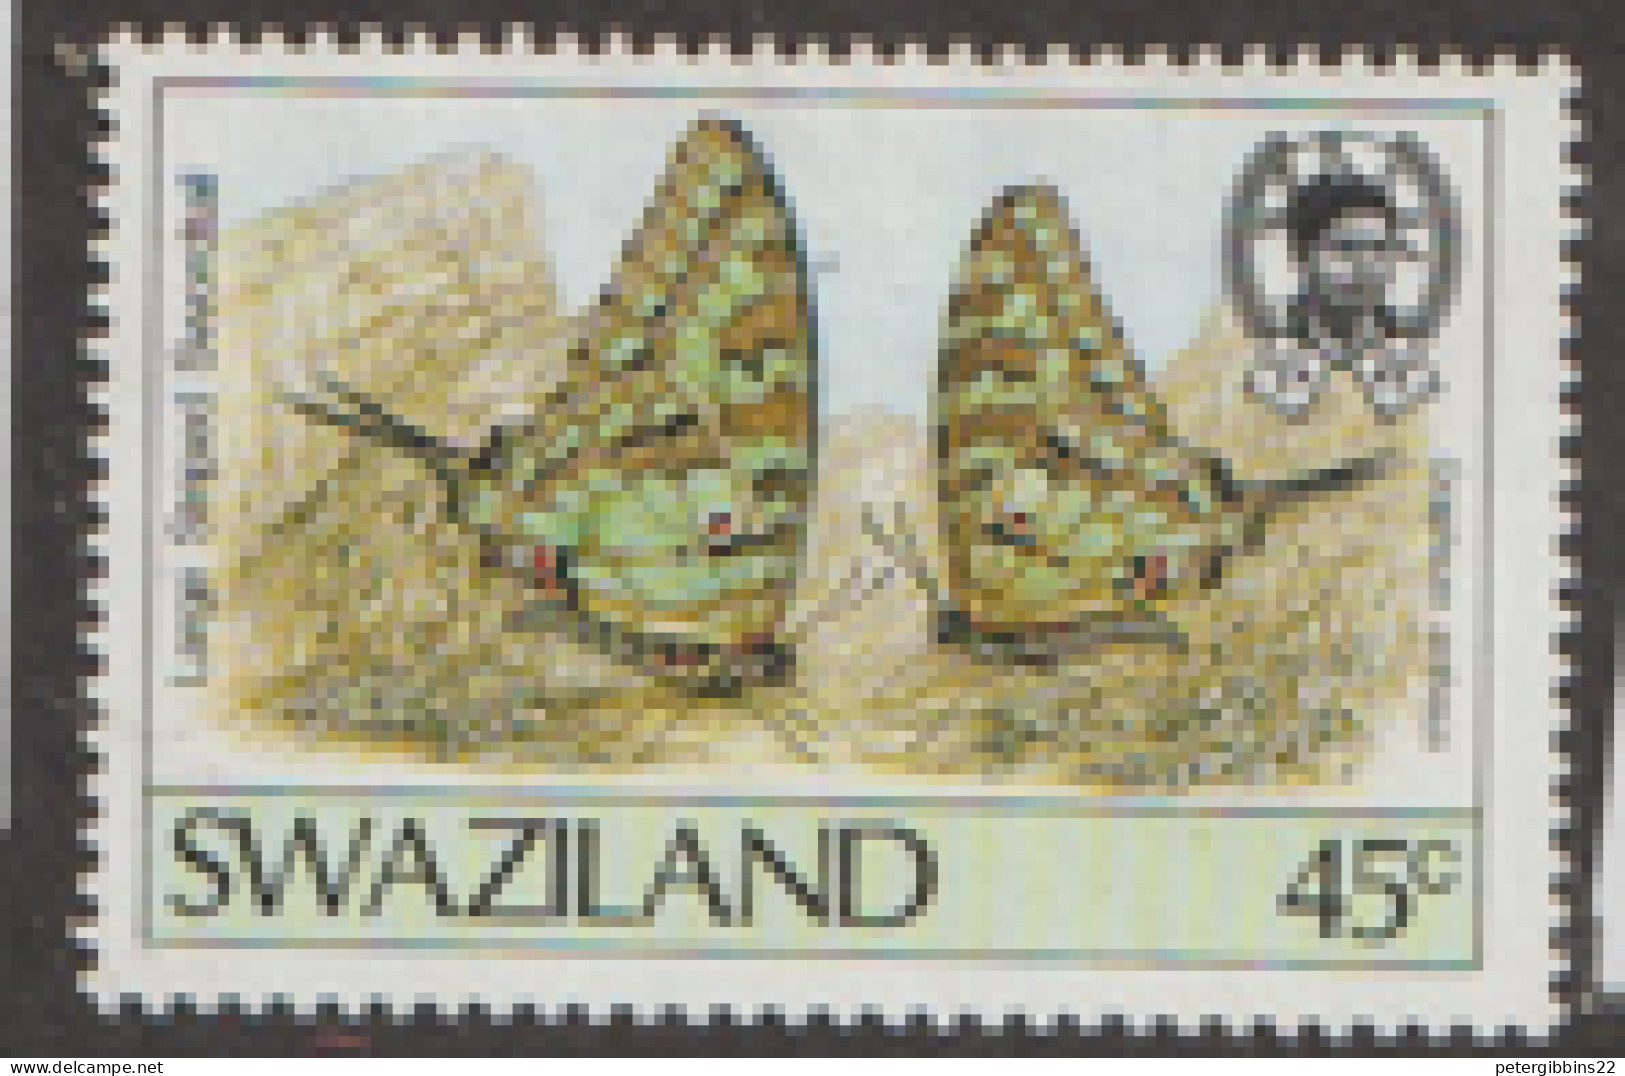 Swaziland  1987  SG 522  45c Butterfly Fine Used - Swaziland (...-1967)